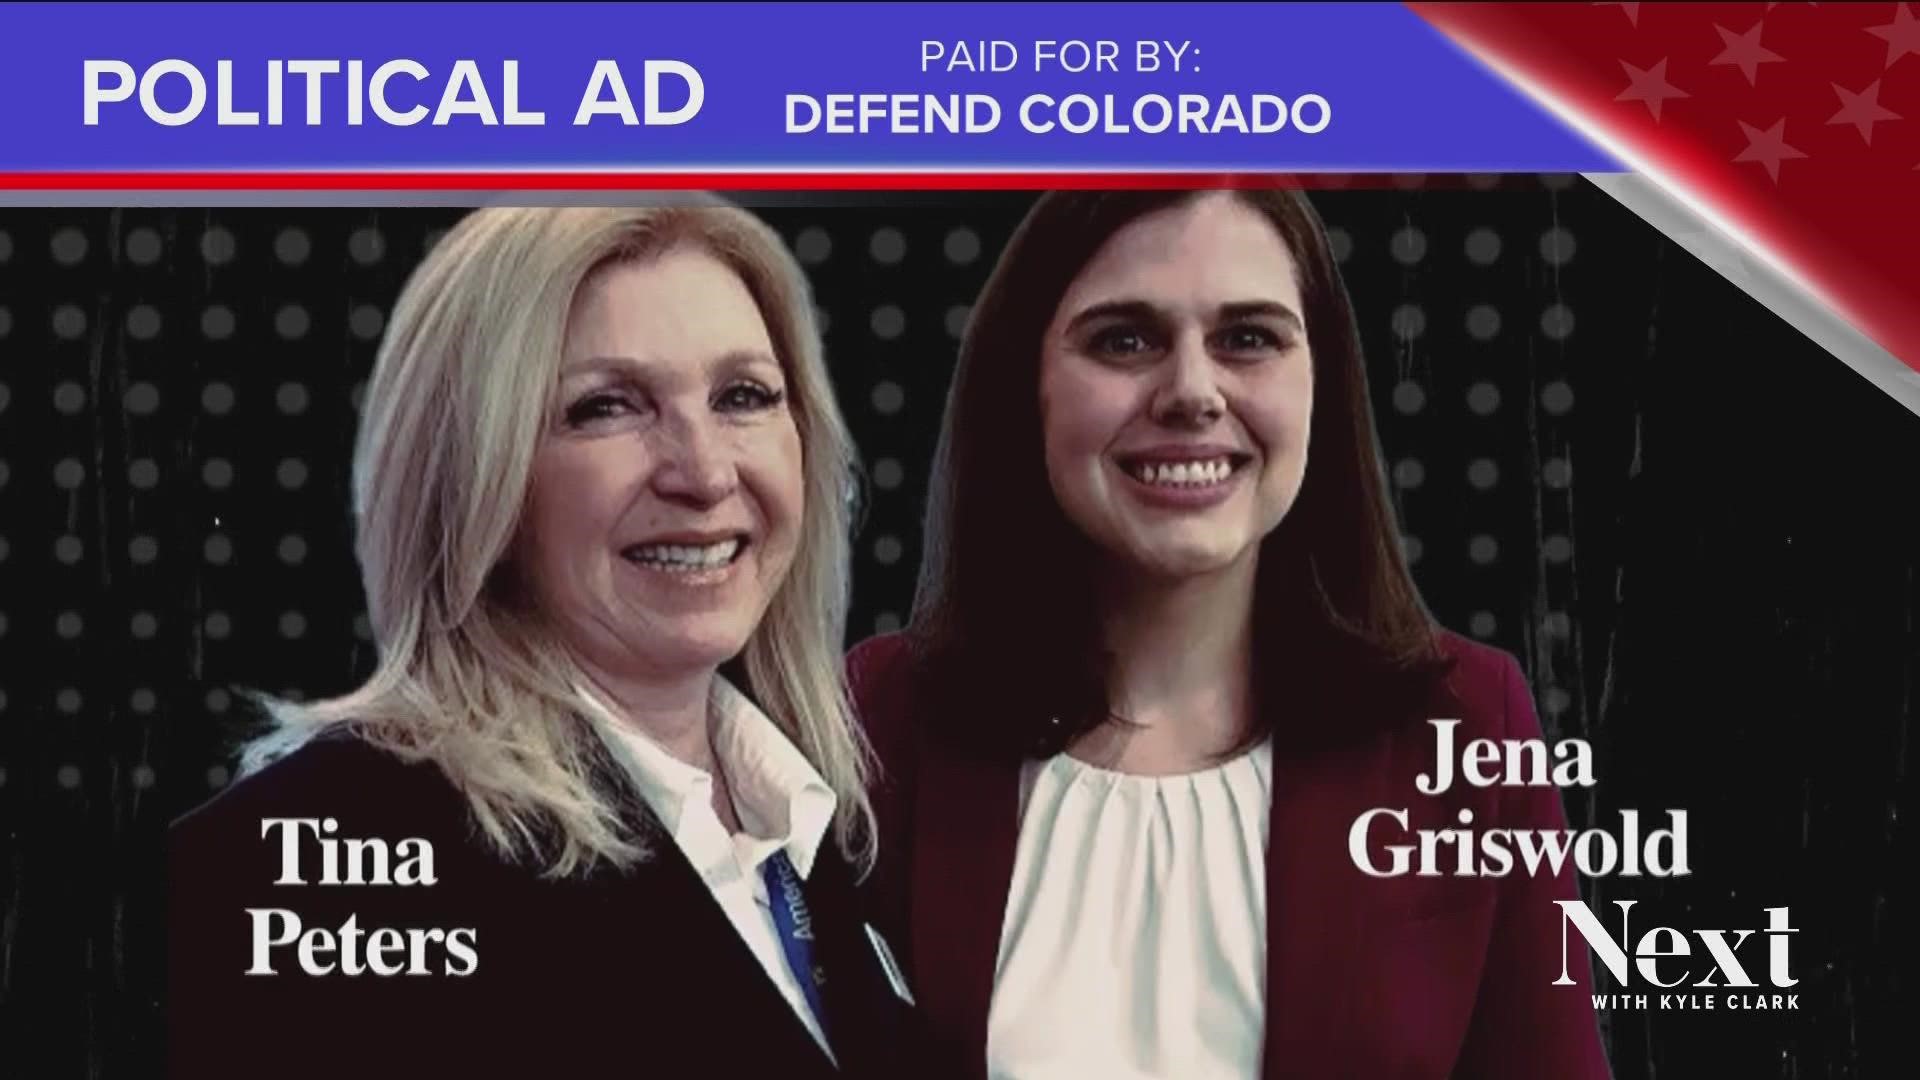 A group called Defend Colorado has a few political ads targeting Republican Tina Peters and Democrat Jena Griswold. One ad even combines the two.